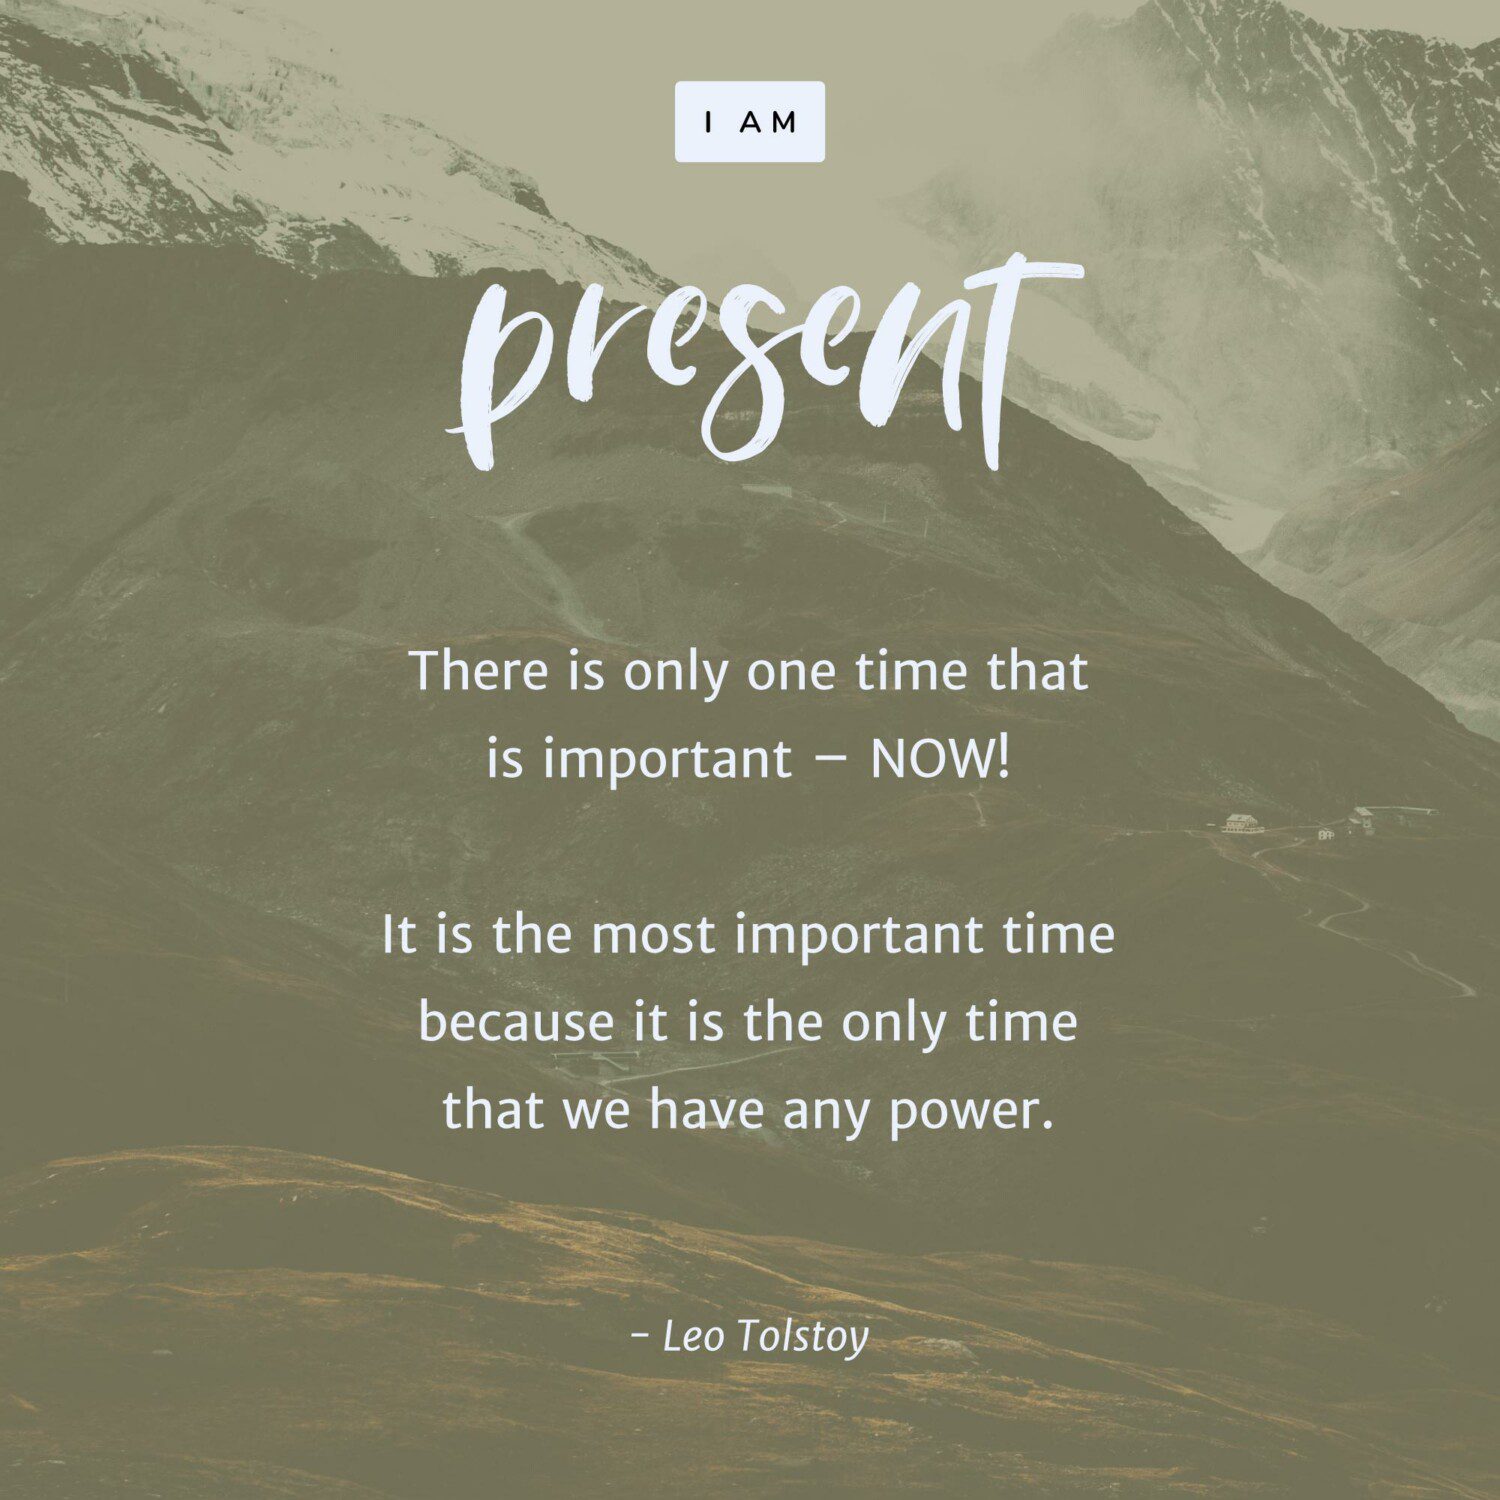 There is only one time that is important – NOW! It is the most important time because it is the only time that we have any power.